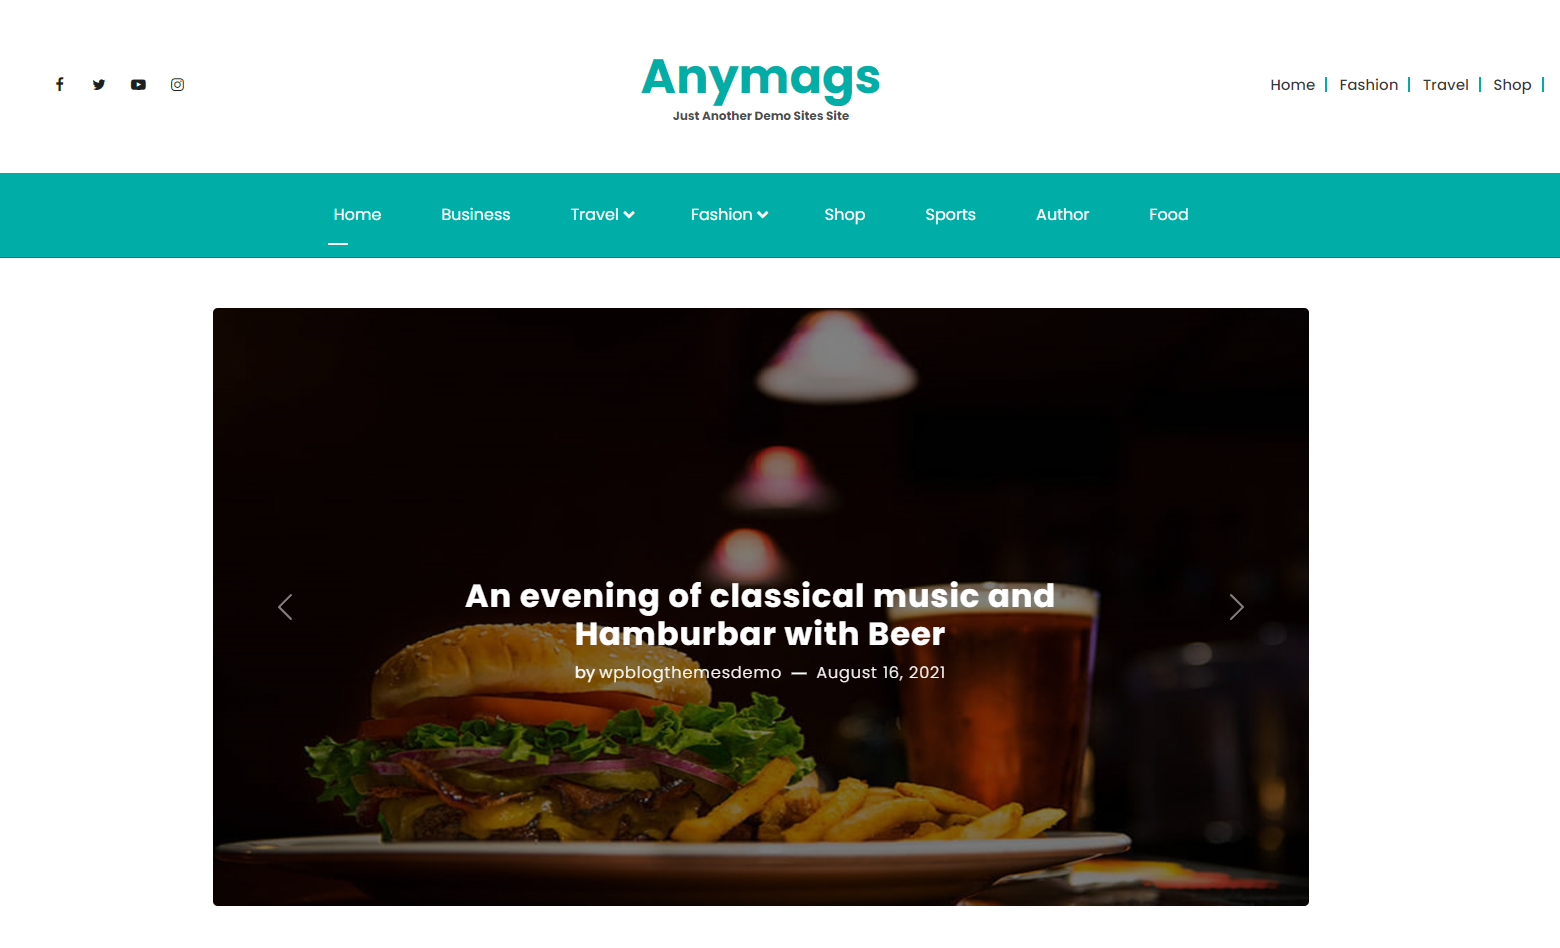 The Anymags Blog Pro WordPress Theme is an elementor-based, modern blog WordPress theme with stunning features and plugin support for more promising website traffic and user engagement.